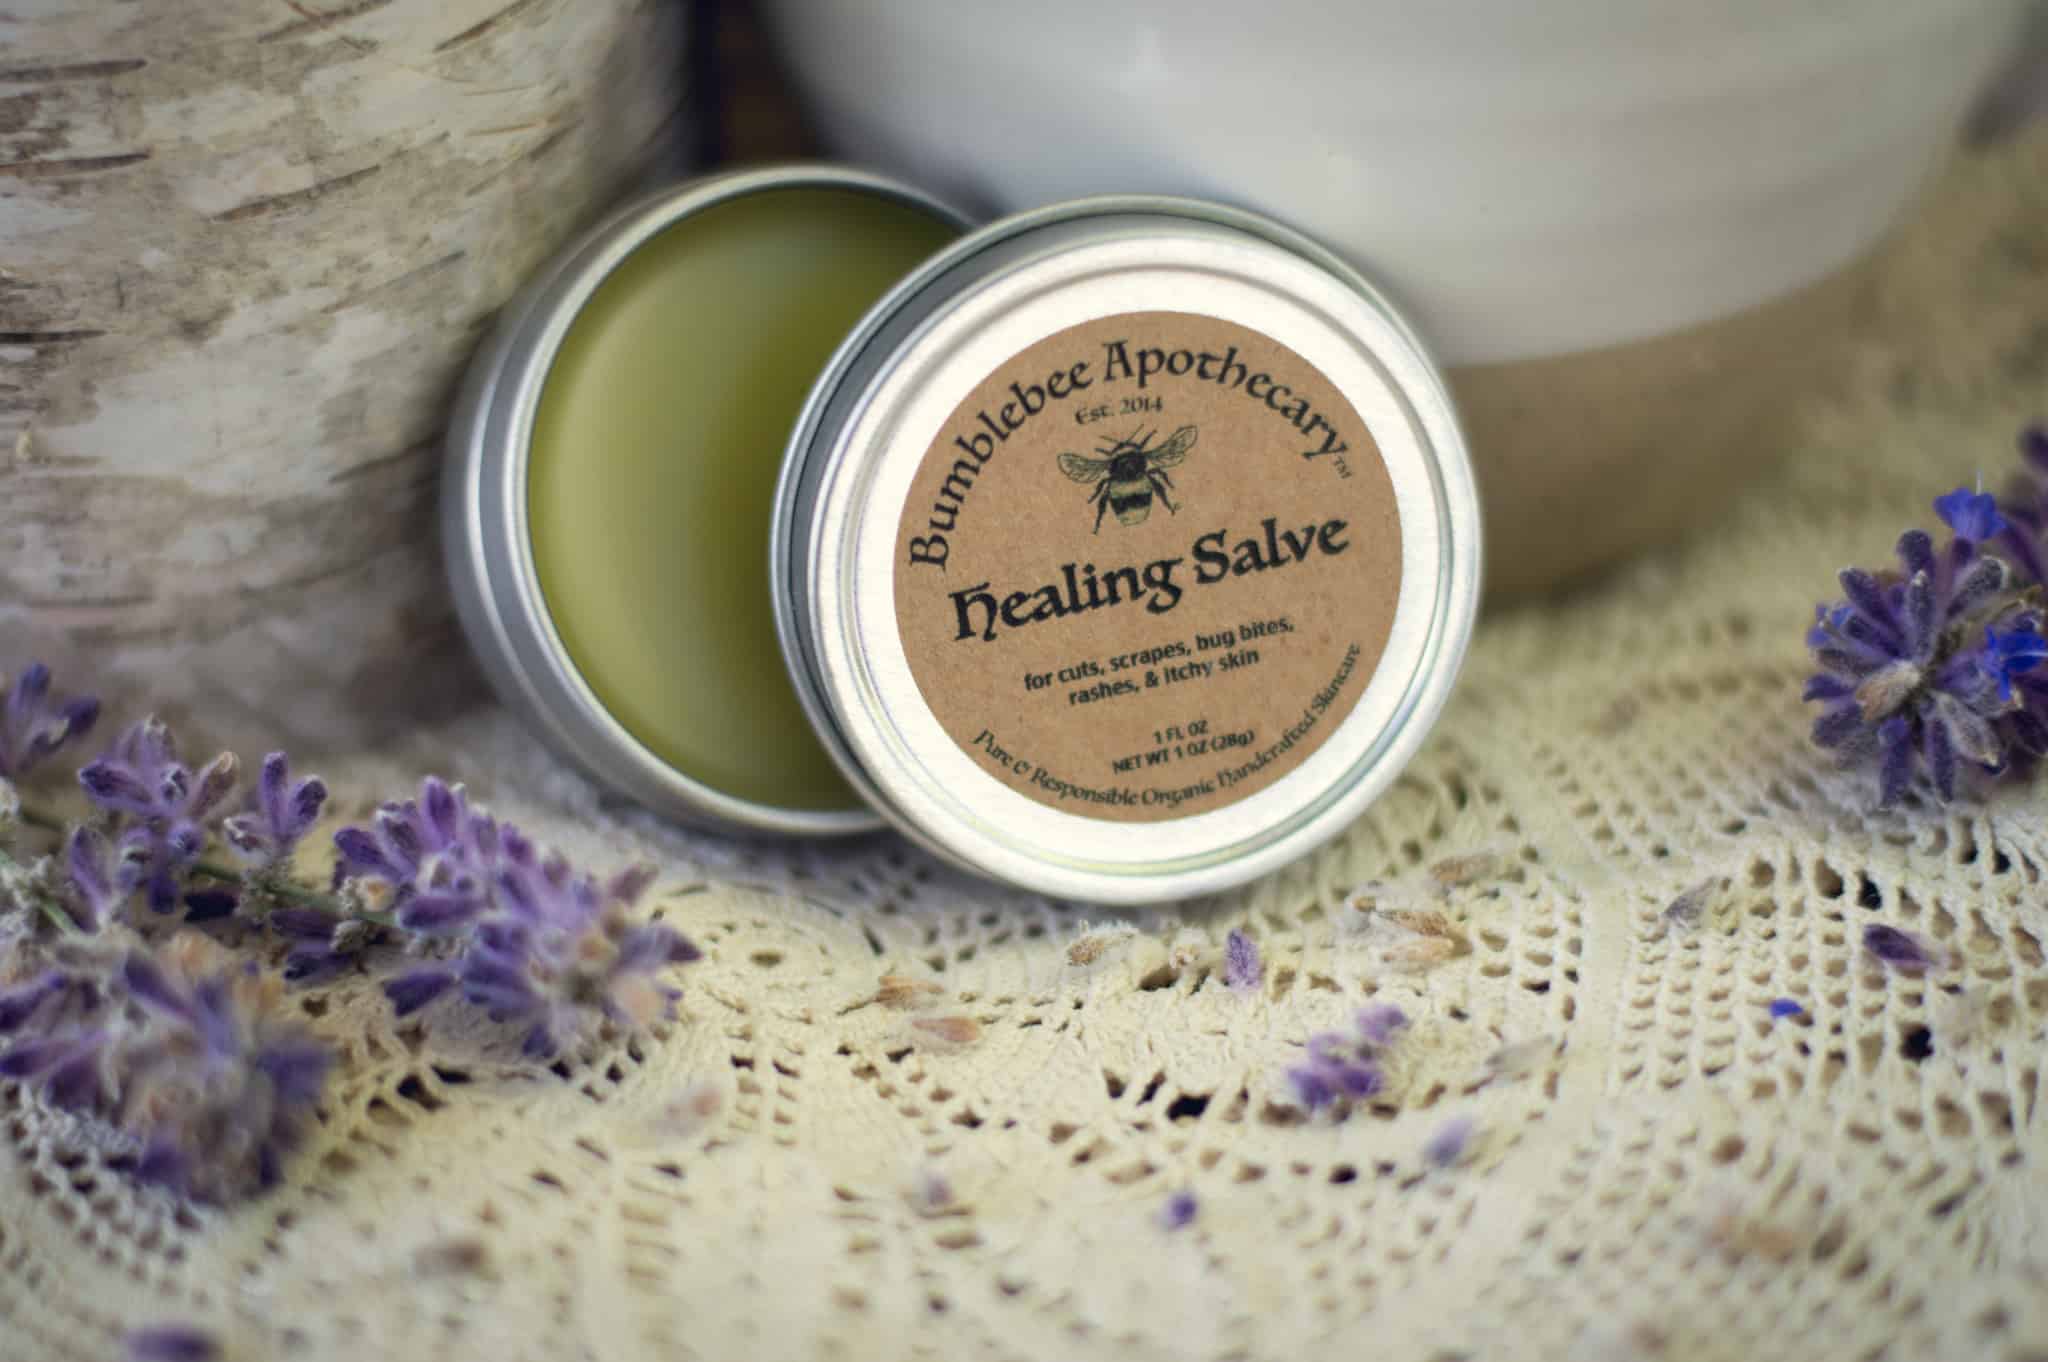 How to make herb infused tallow healing salve